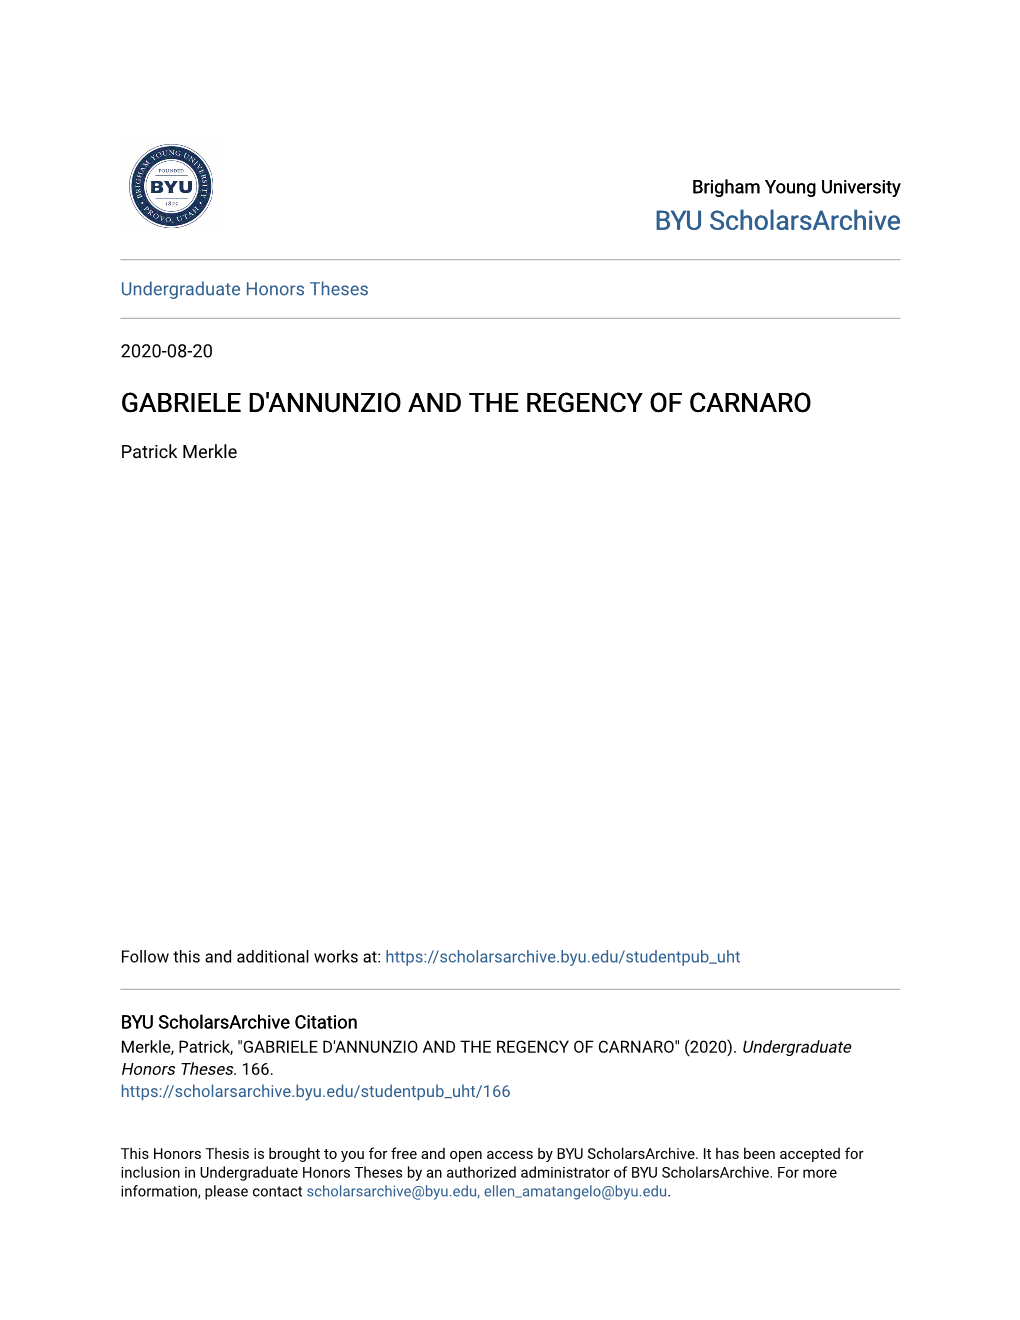 Gabriele D'annunzio and the Regency of Carnaro